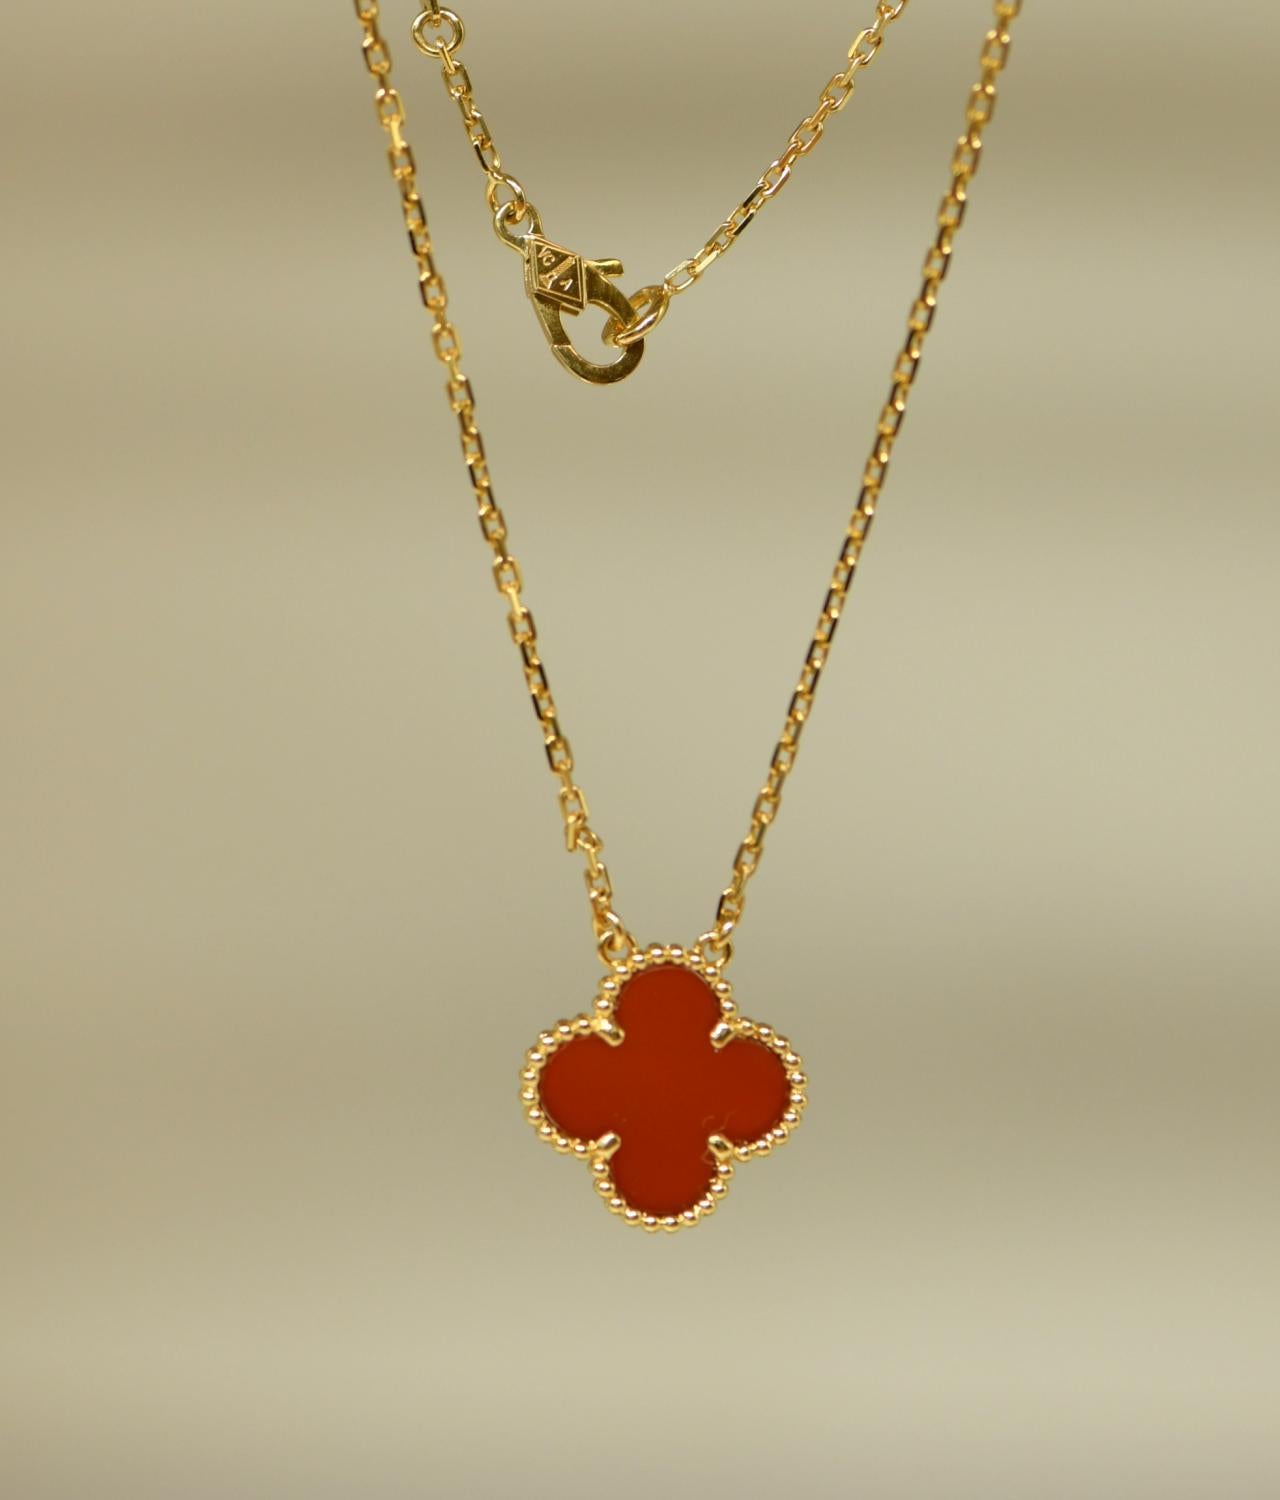 A classic Van Cleef & Arpels Alhambra carnelian pendant necklace. 

This is the kind of piece that will become a staple of your jewellery collection. You will find yourself reaching for it time after time. It will go with almost any outfit and add a